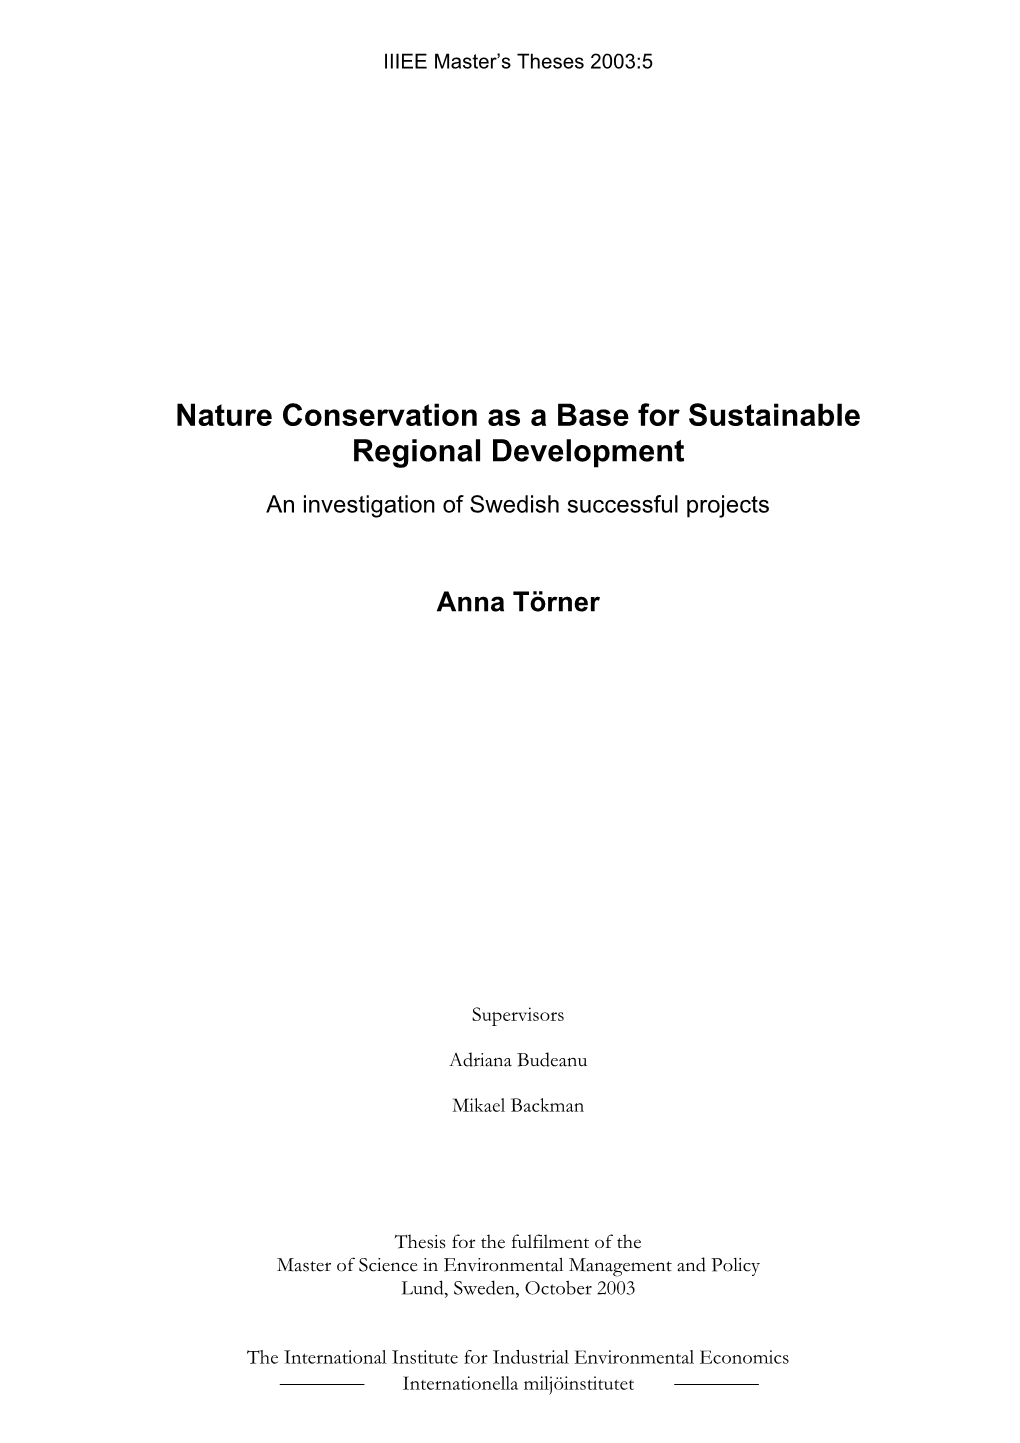 Thesis for the Fulfilment of the Master of Science in Environmental Management and Policy Lund, Sweden, October 2003